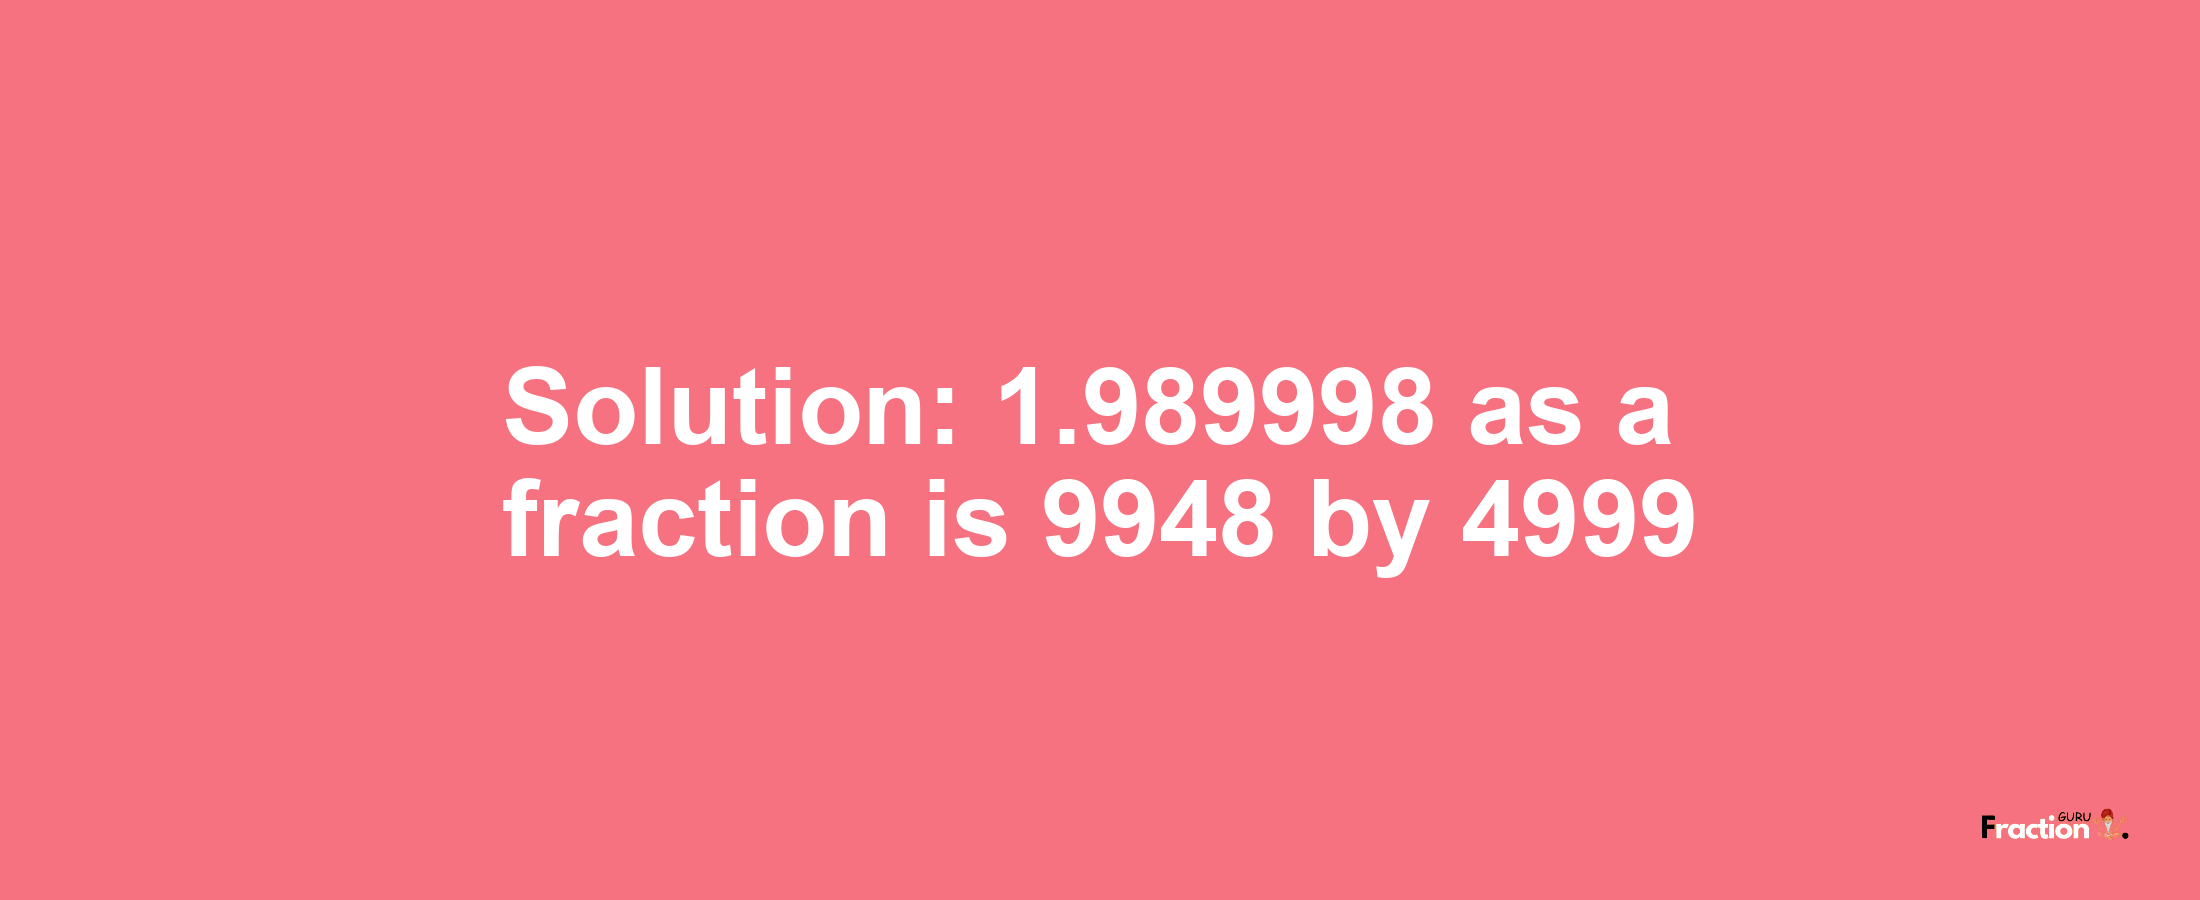 Solution:1.989998 as a fraction is 9948/4999